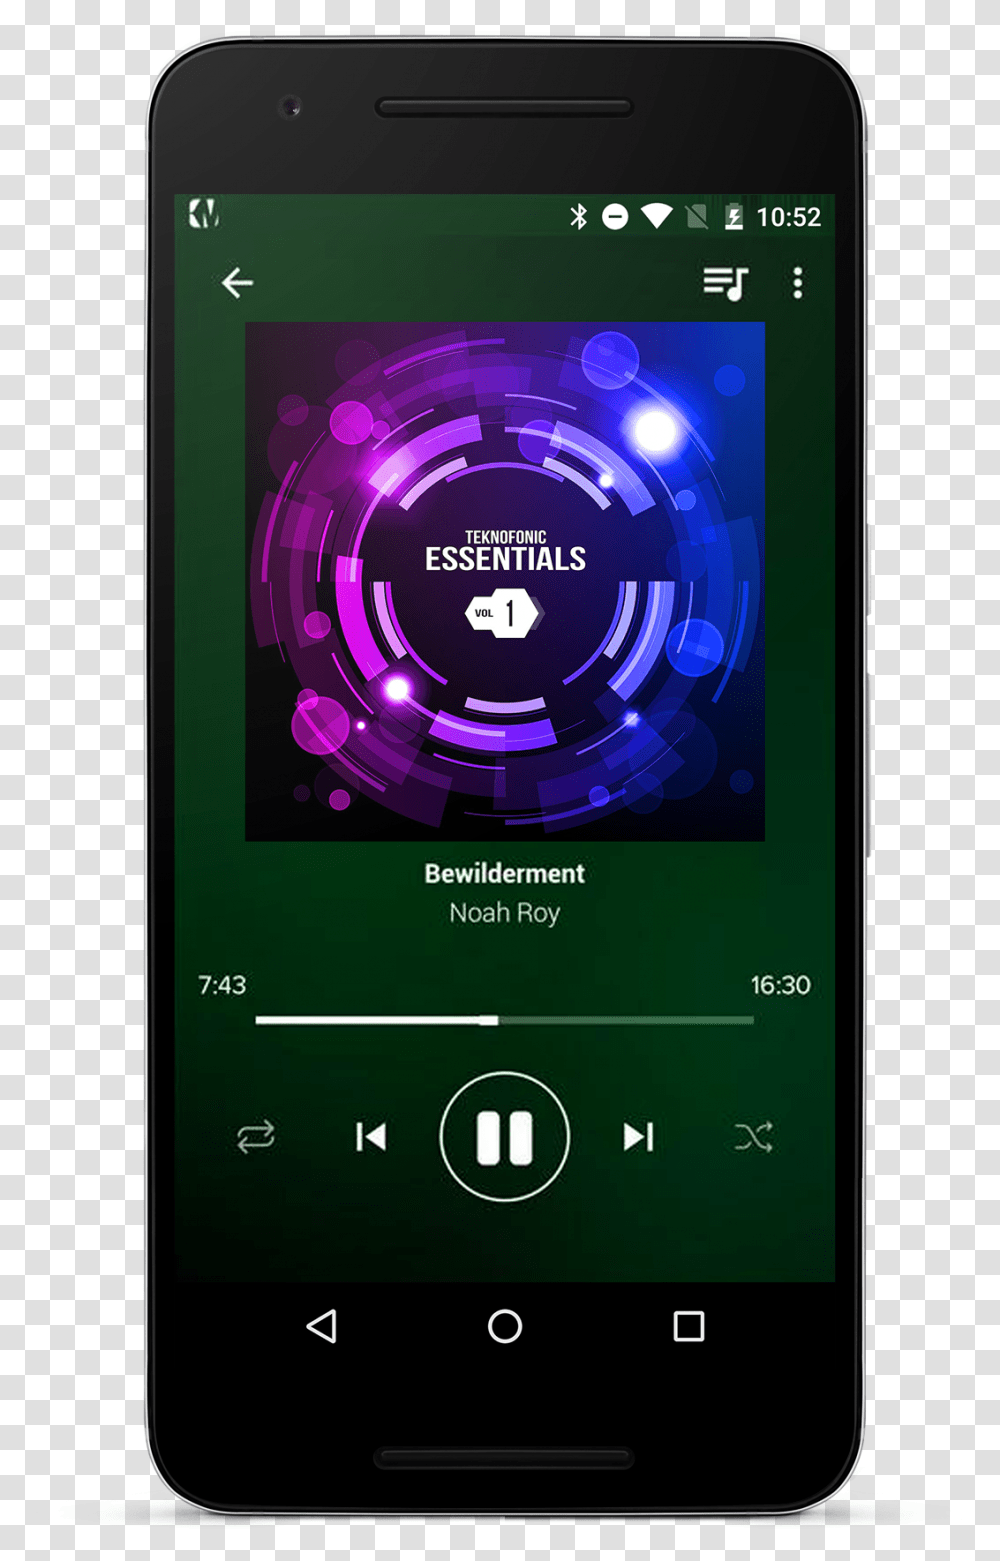 Futuristic Interface Wave Music Player Pro V2 Tunein Technology Applications, Mobile Phone, Electronics, Cell Phone, Poster Transparent Png